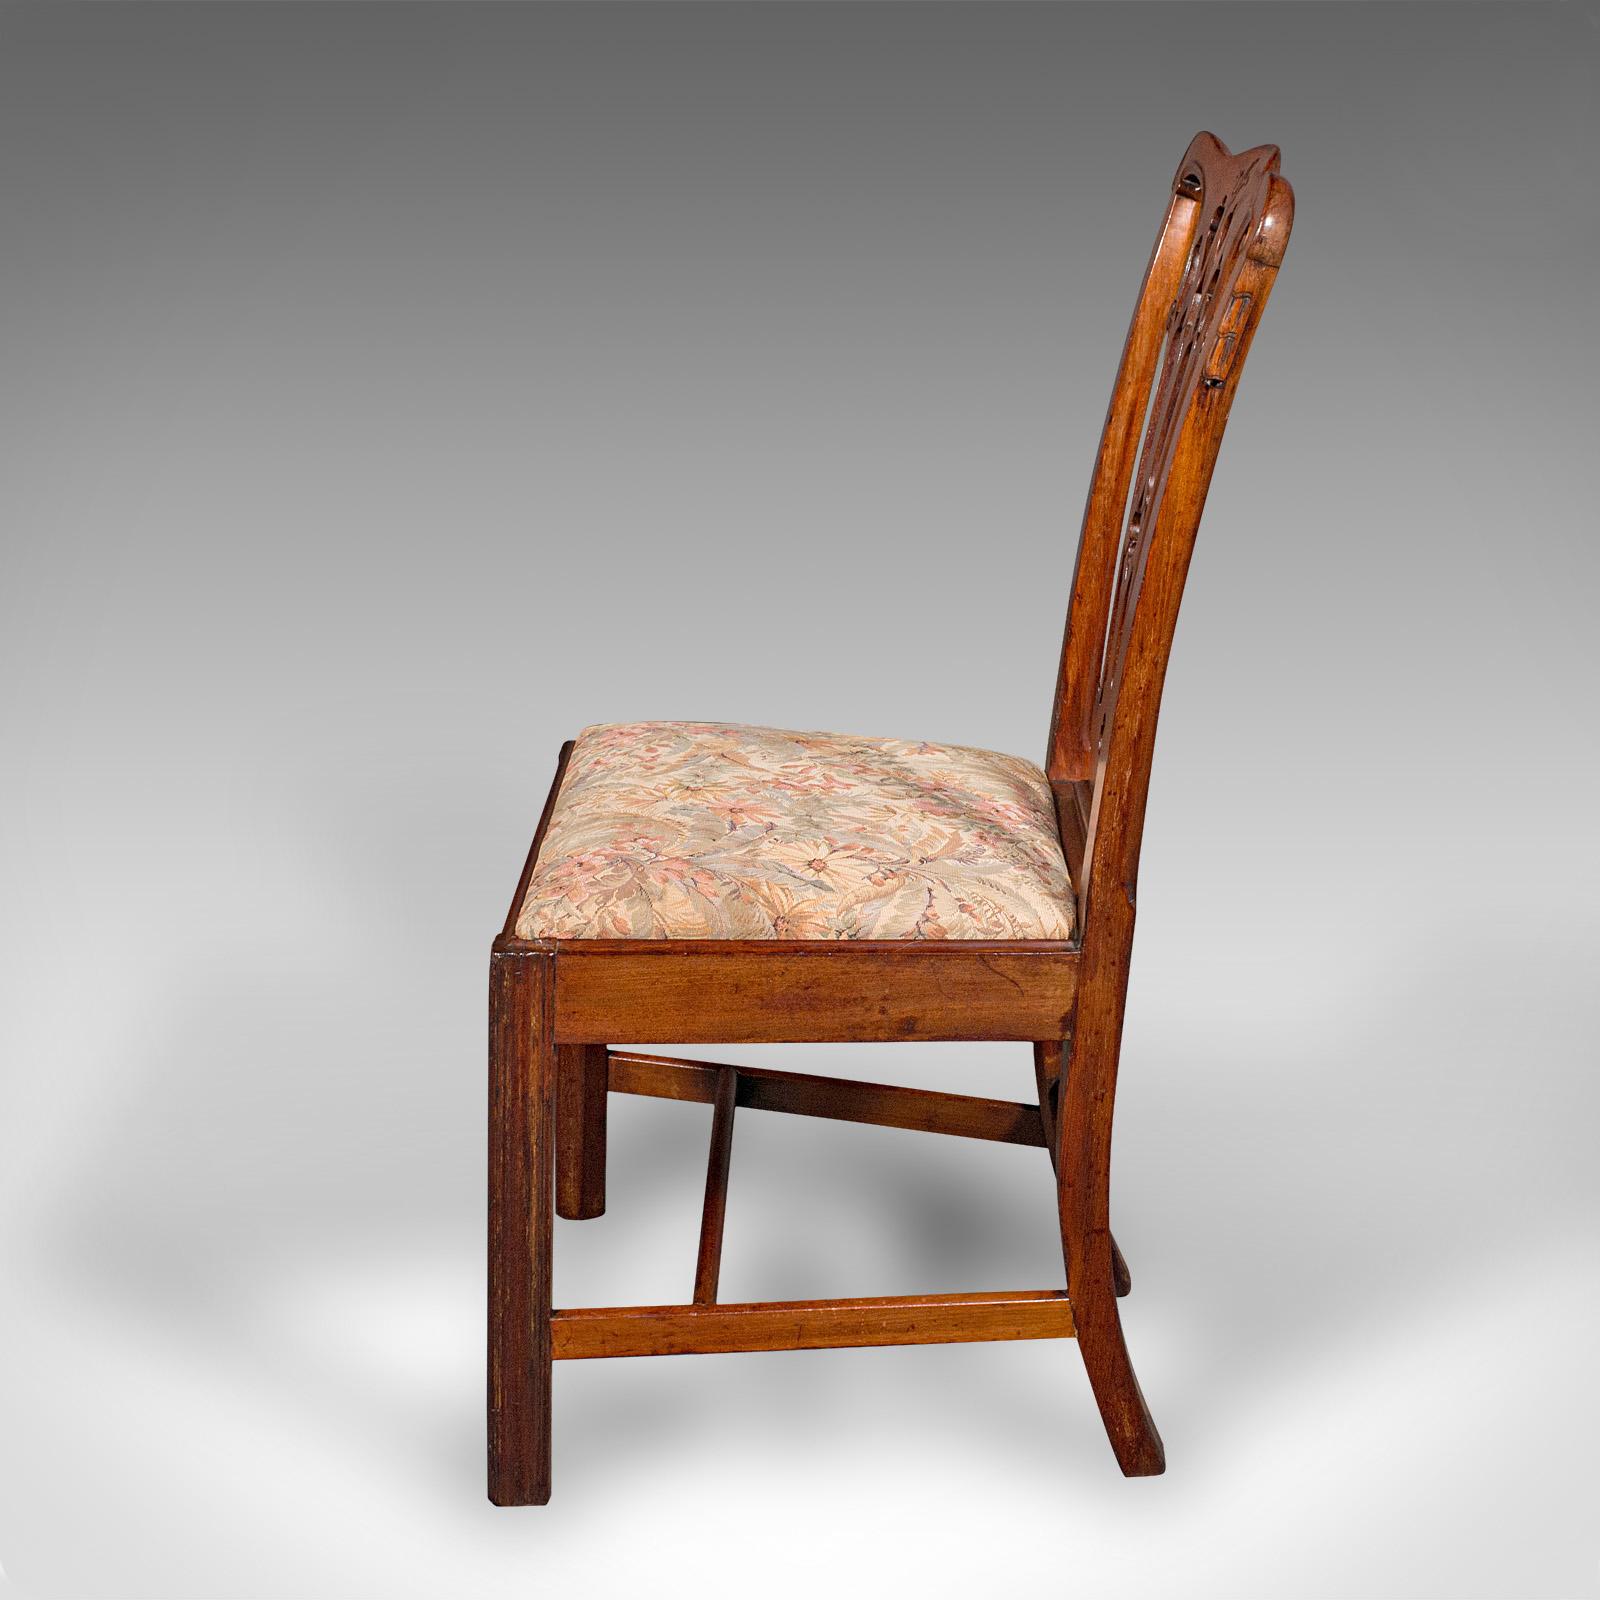 British 6 Antique Dining Room Chairs, English, Walnut, After Chippendale, Georgian, 1800